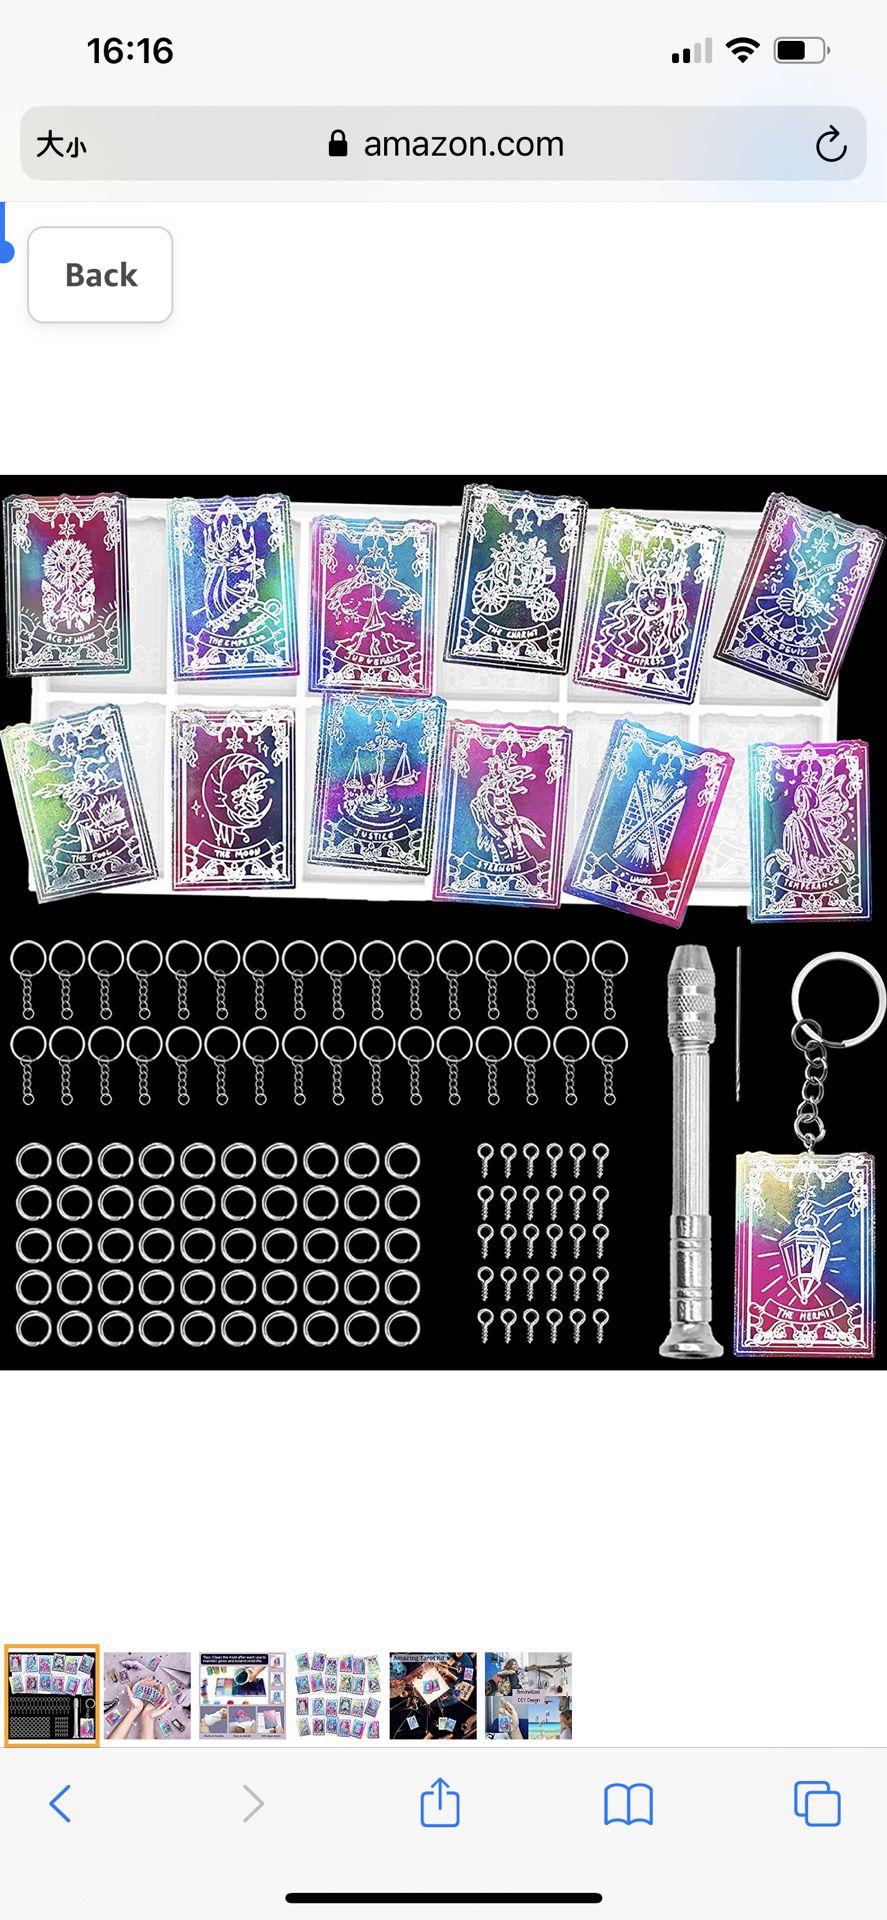 Glicrili Tarot Card Resin Molds Silicone - 24 Different Tarot Card Molds Keychain Making Set,Small Tarot Silicone Molds Kits,Epoxy Resin Casting Molds